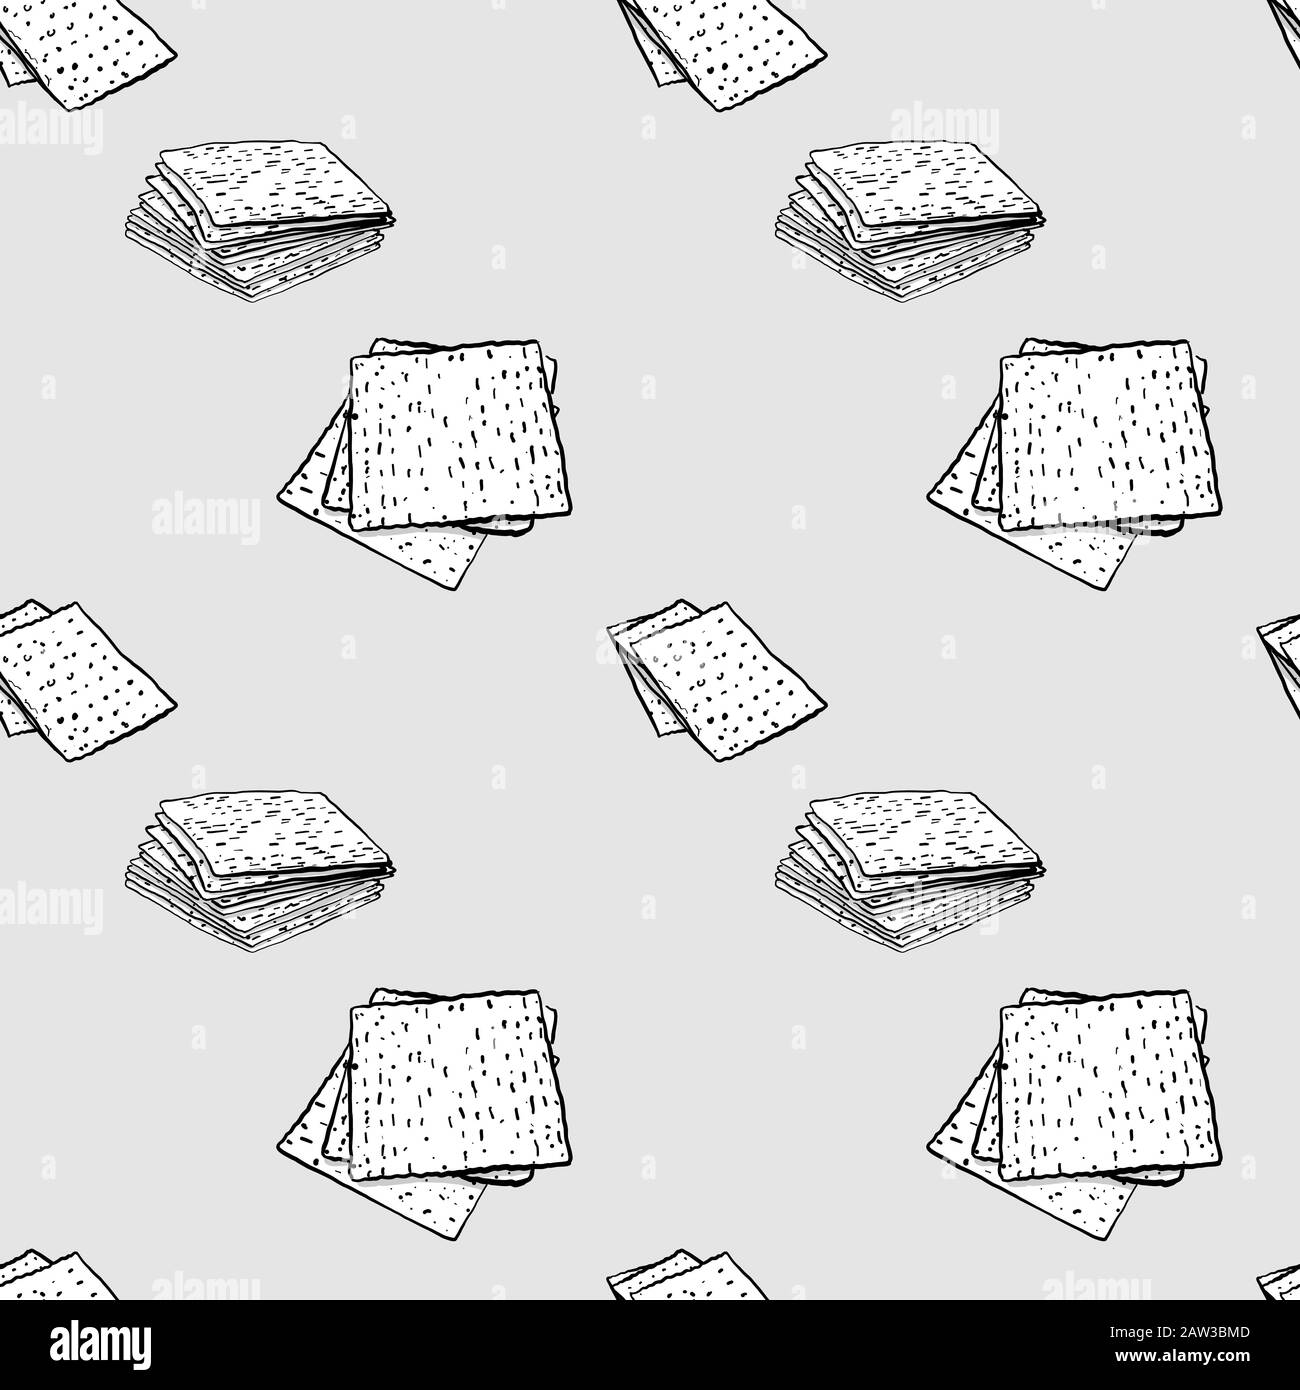 Matzo seamless pattern greyscale drawing. Useable for wallpaper or any sized decoration. Handdrawn Vector Illustration Stock Vector